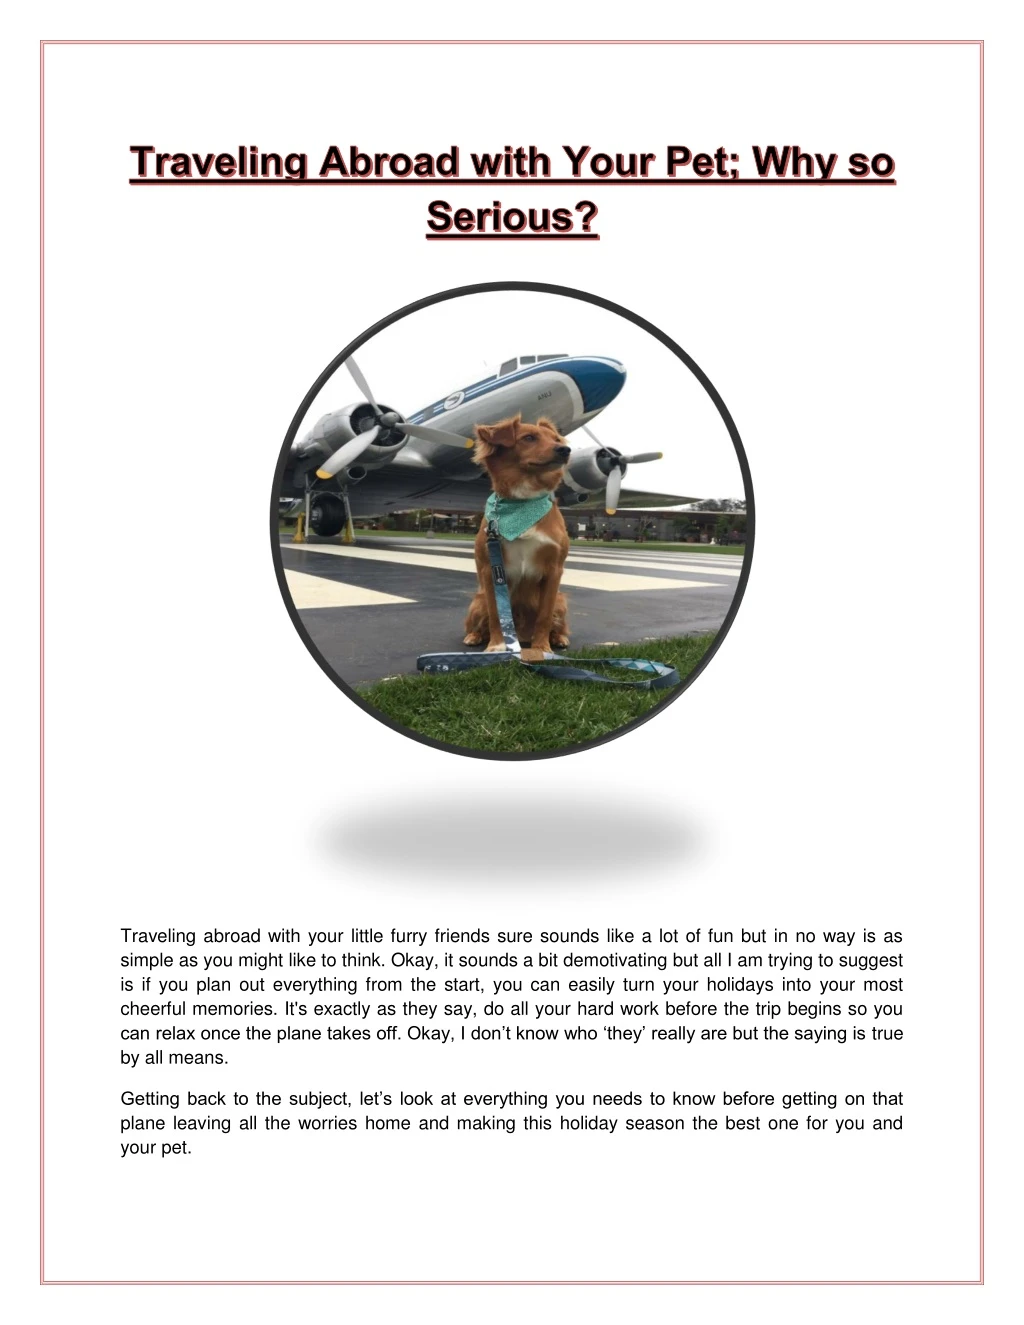 traveling abroad with your little furry friends